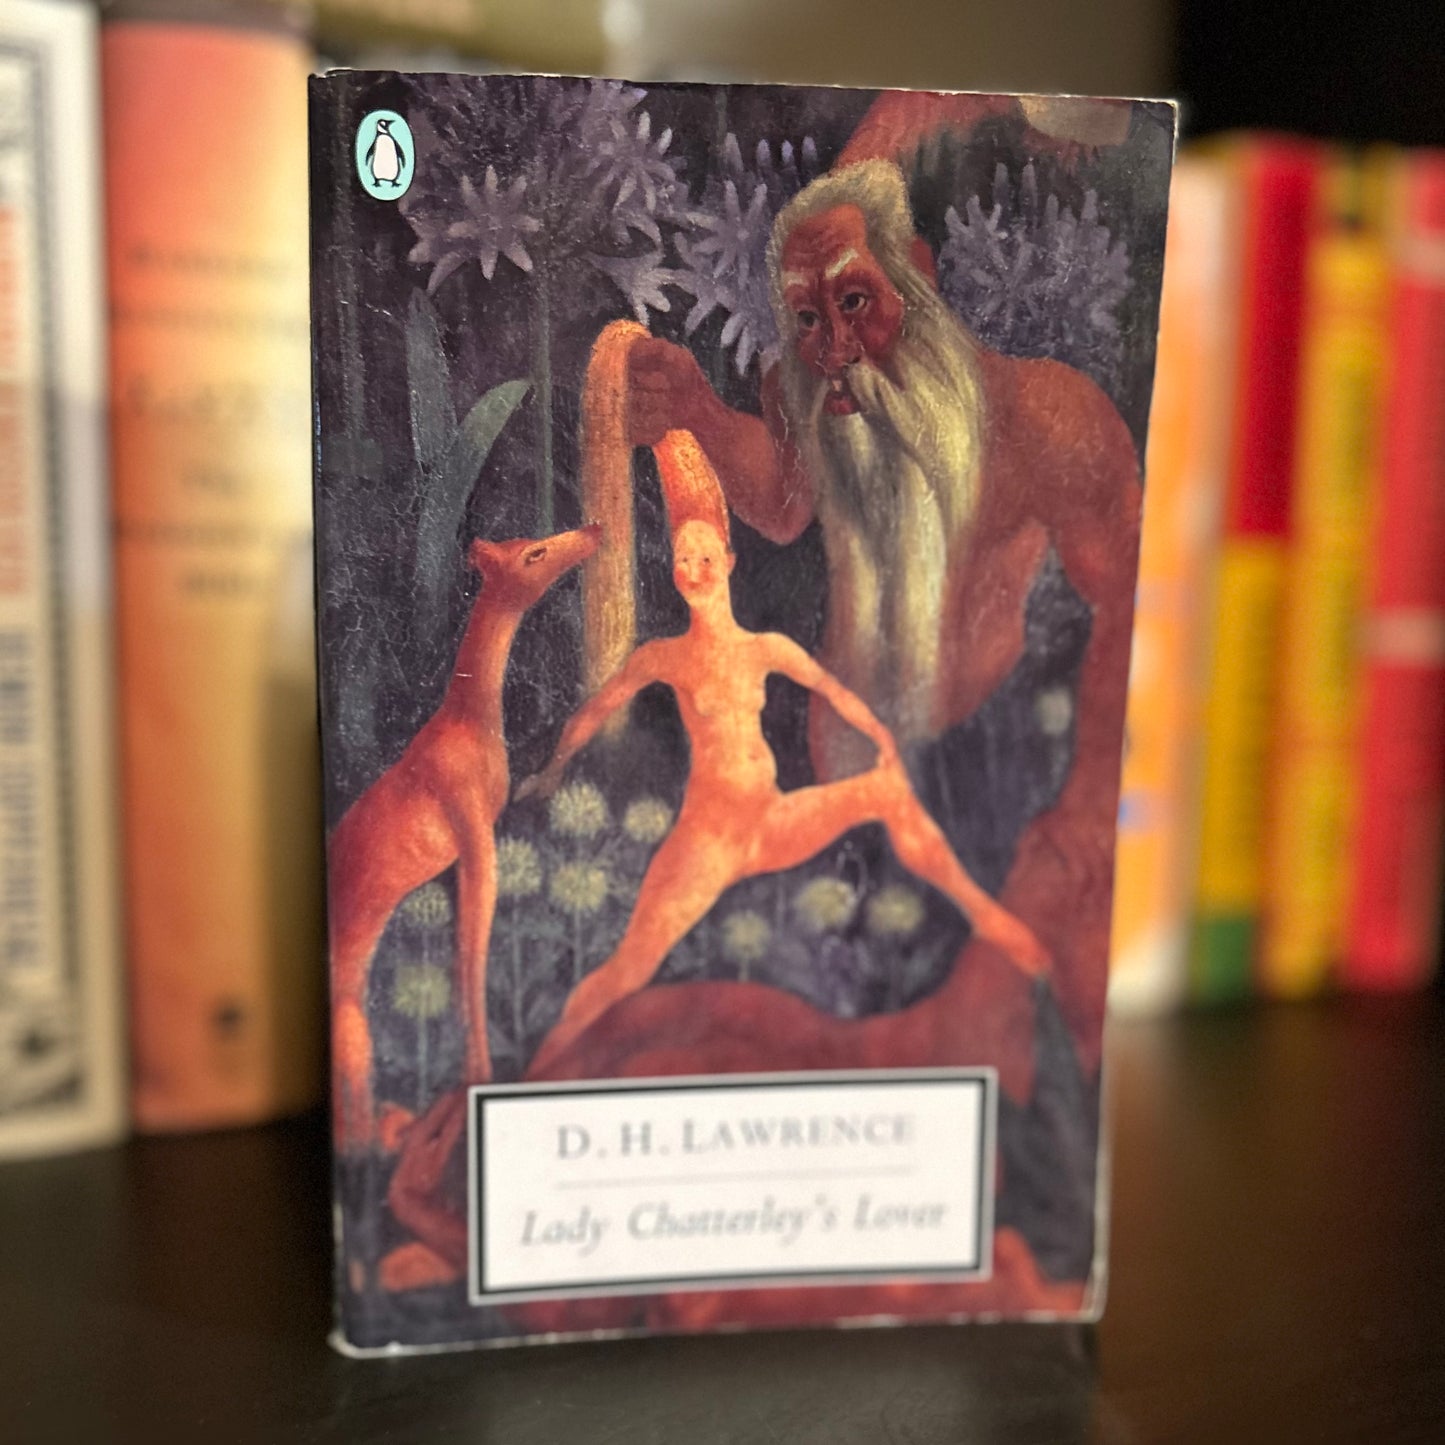 Lady Chatterley’s Lover - DH Lawrence - Penguin